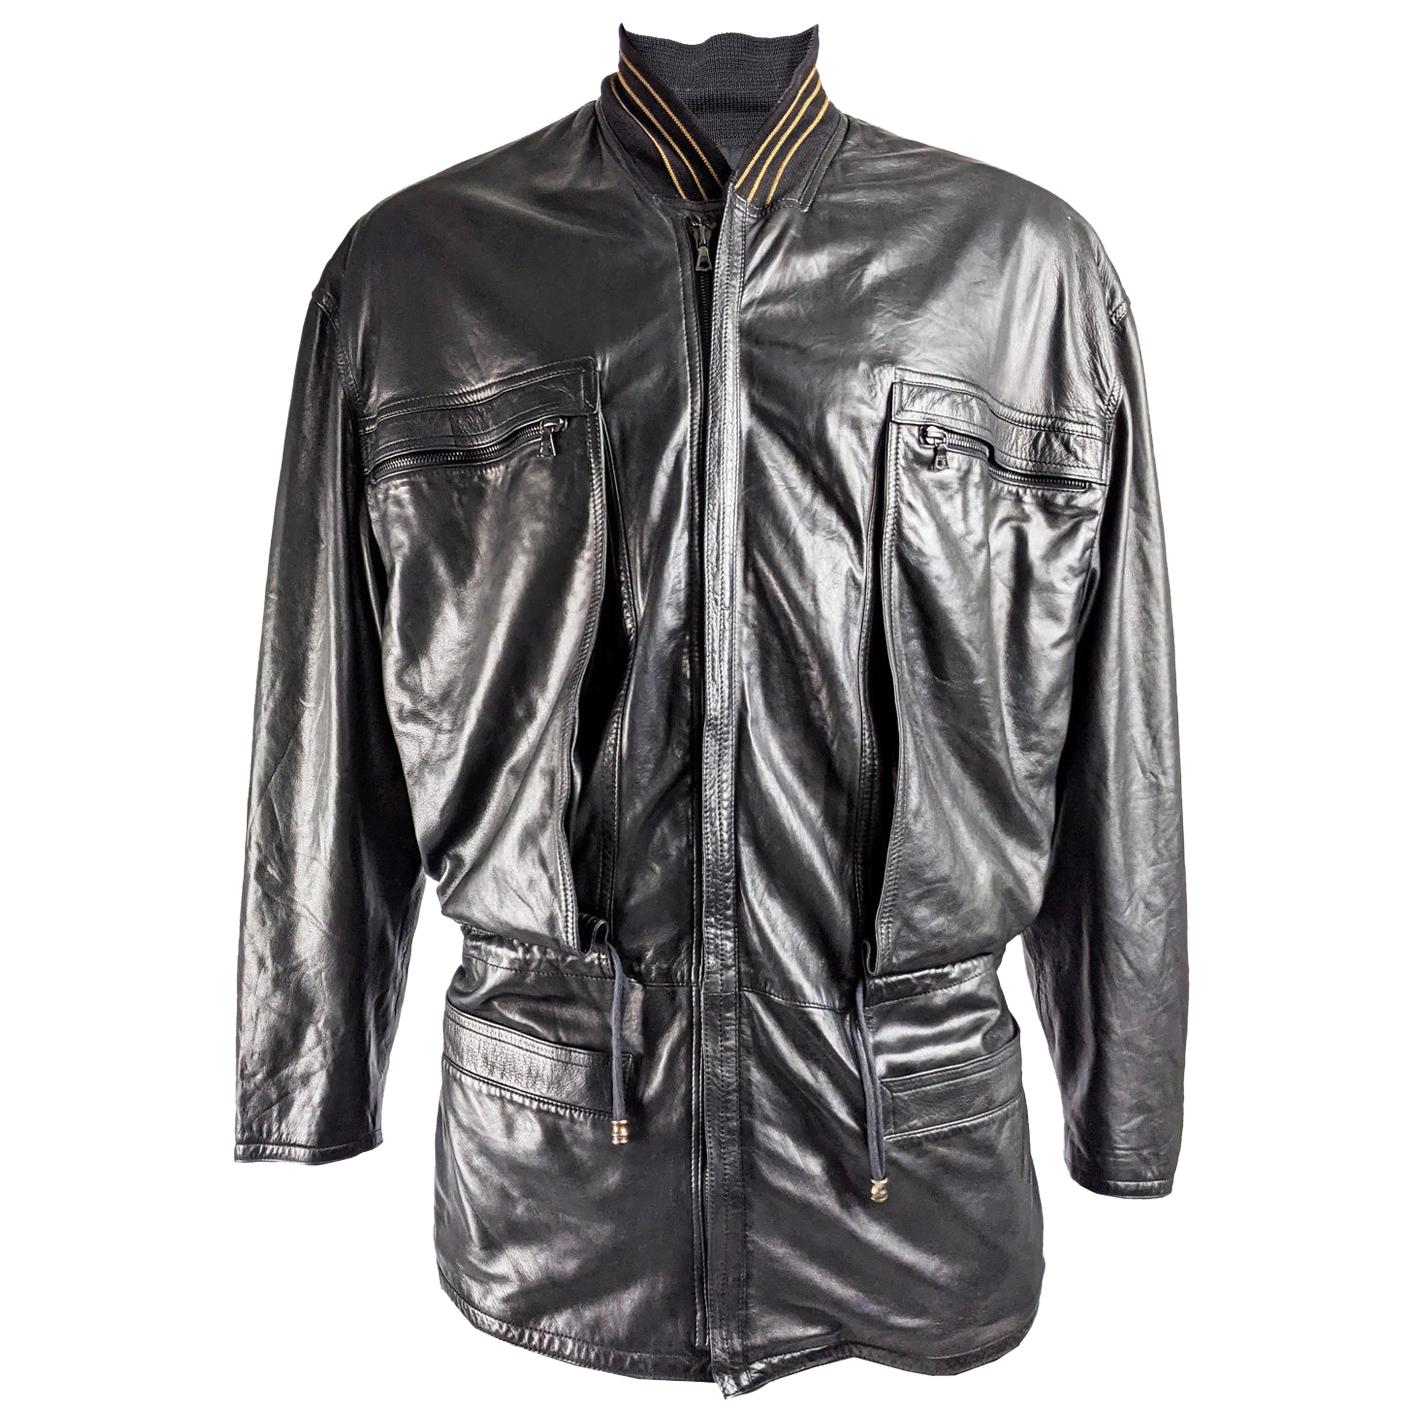 Gianni Versace Rare Mens Leather Jacket, A/W 1986